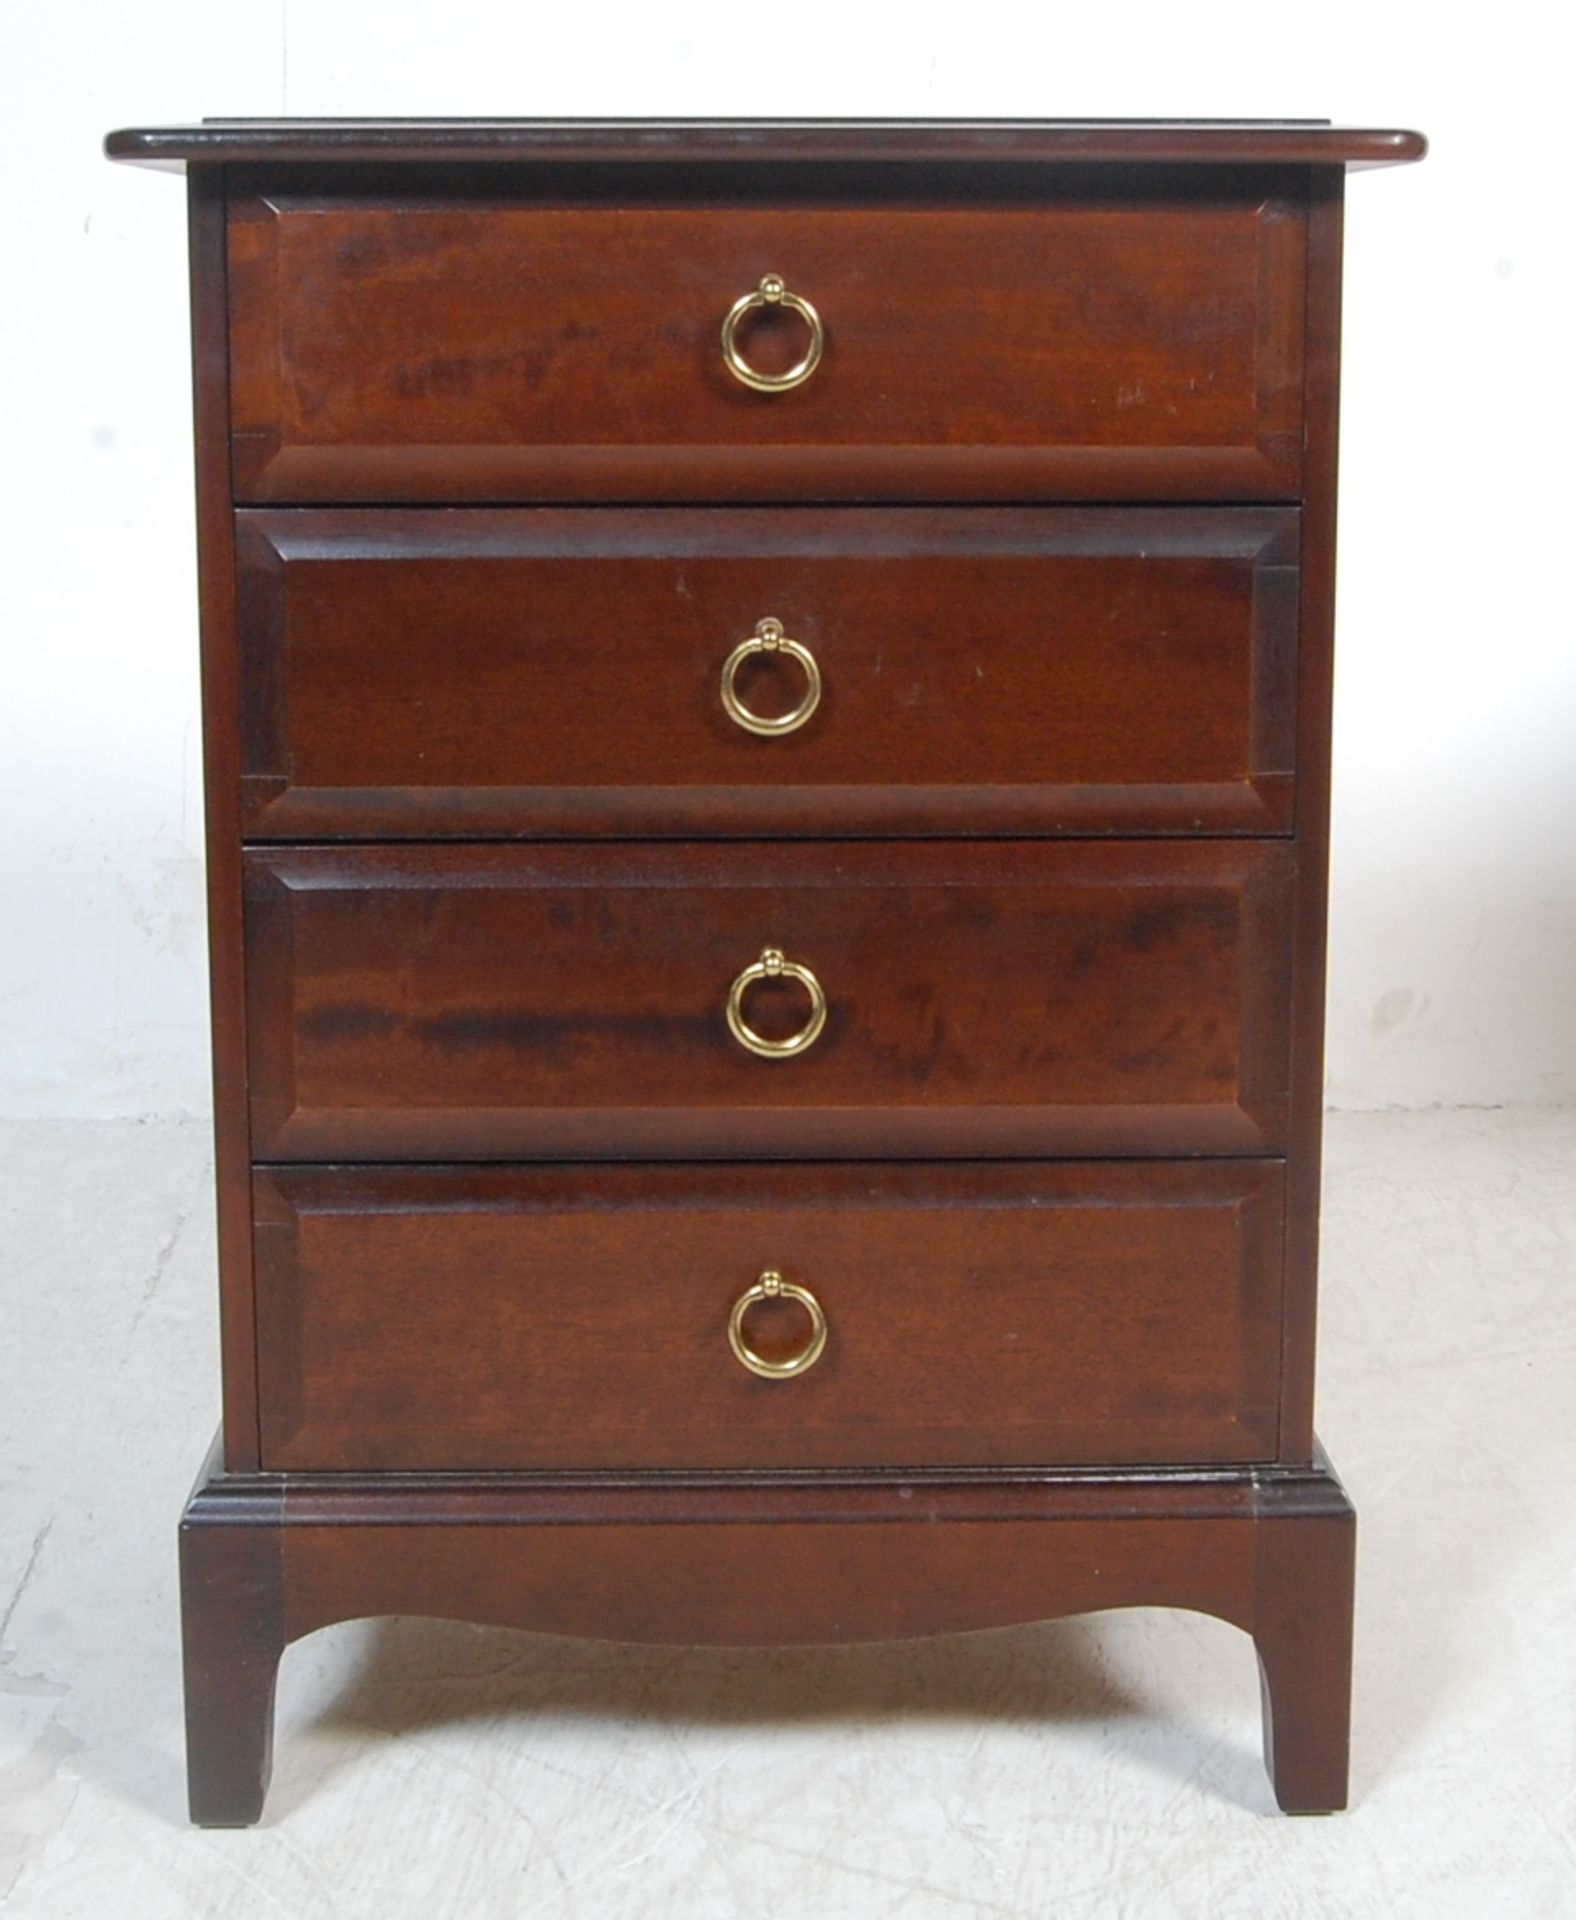 PAIR OF VINTAGE STAG MINSTREL BEDSIDE CHESTS OF DRAWERS - Image 11 of 18